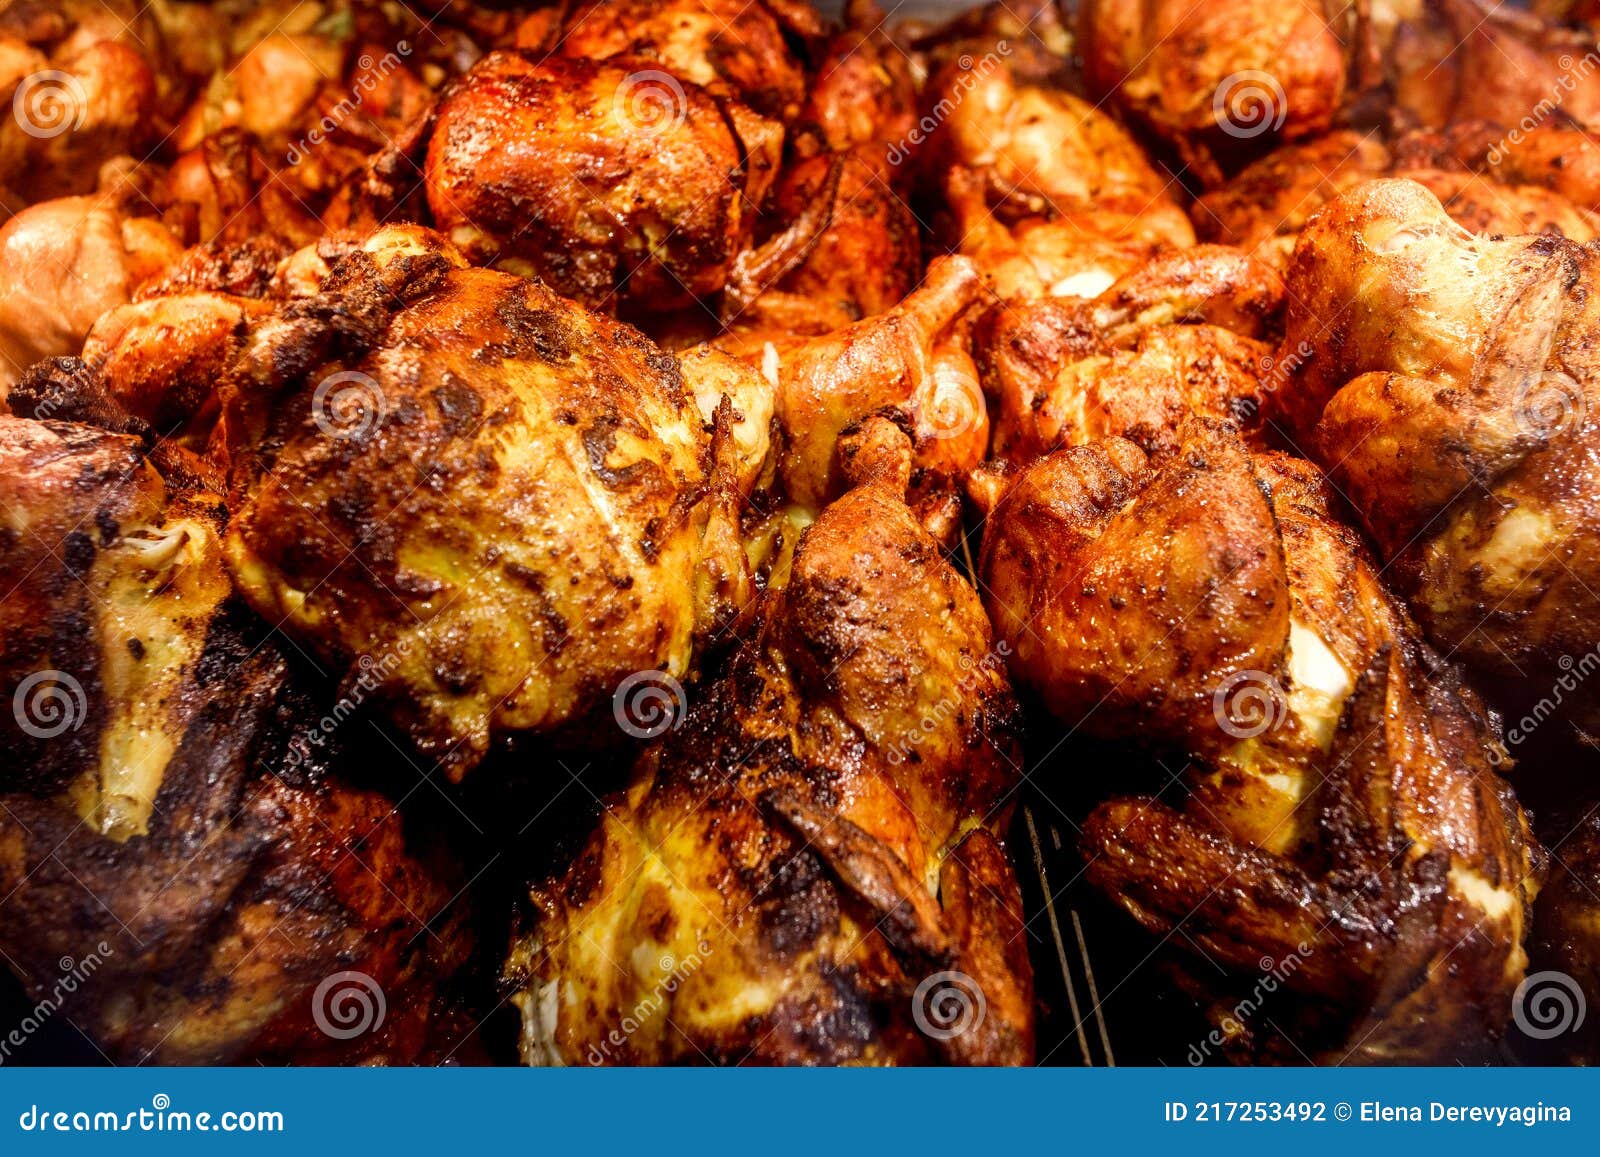 Grilled Chickens Cooked, Whole Chicken Fried, Piled in Bulk, in ...